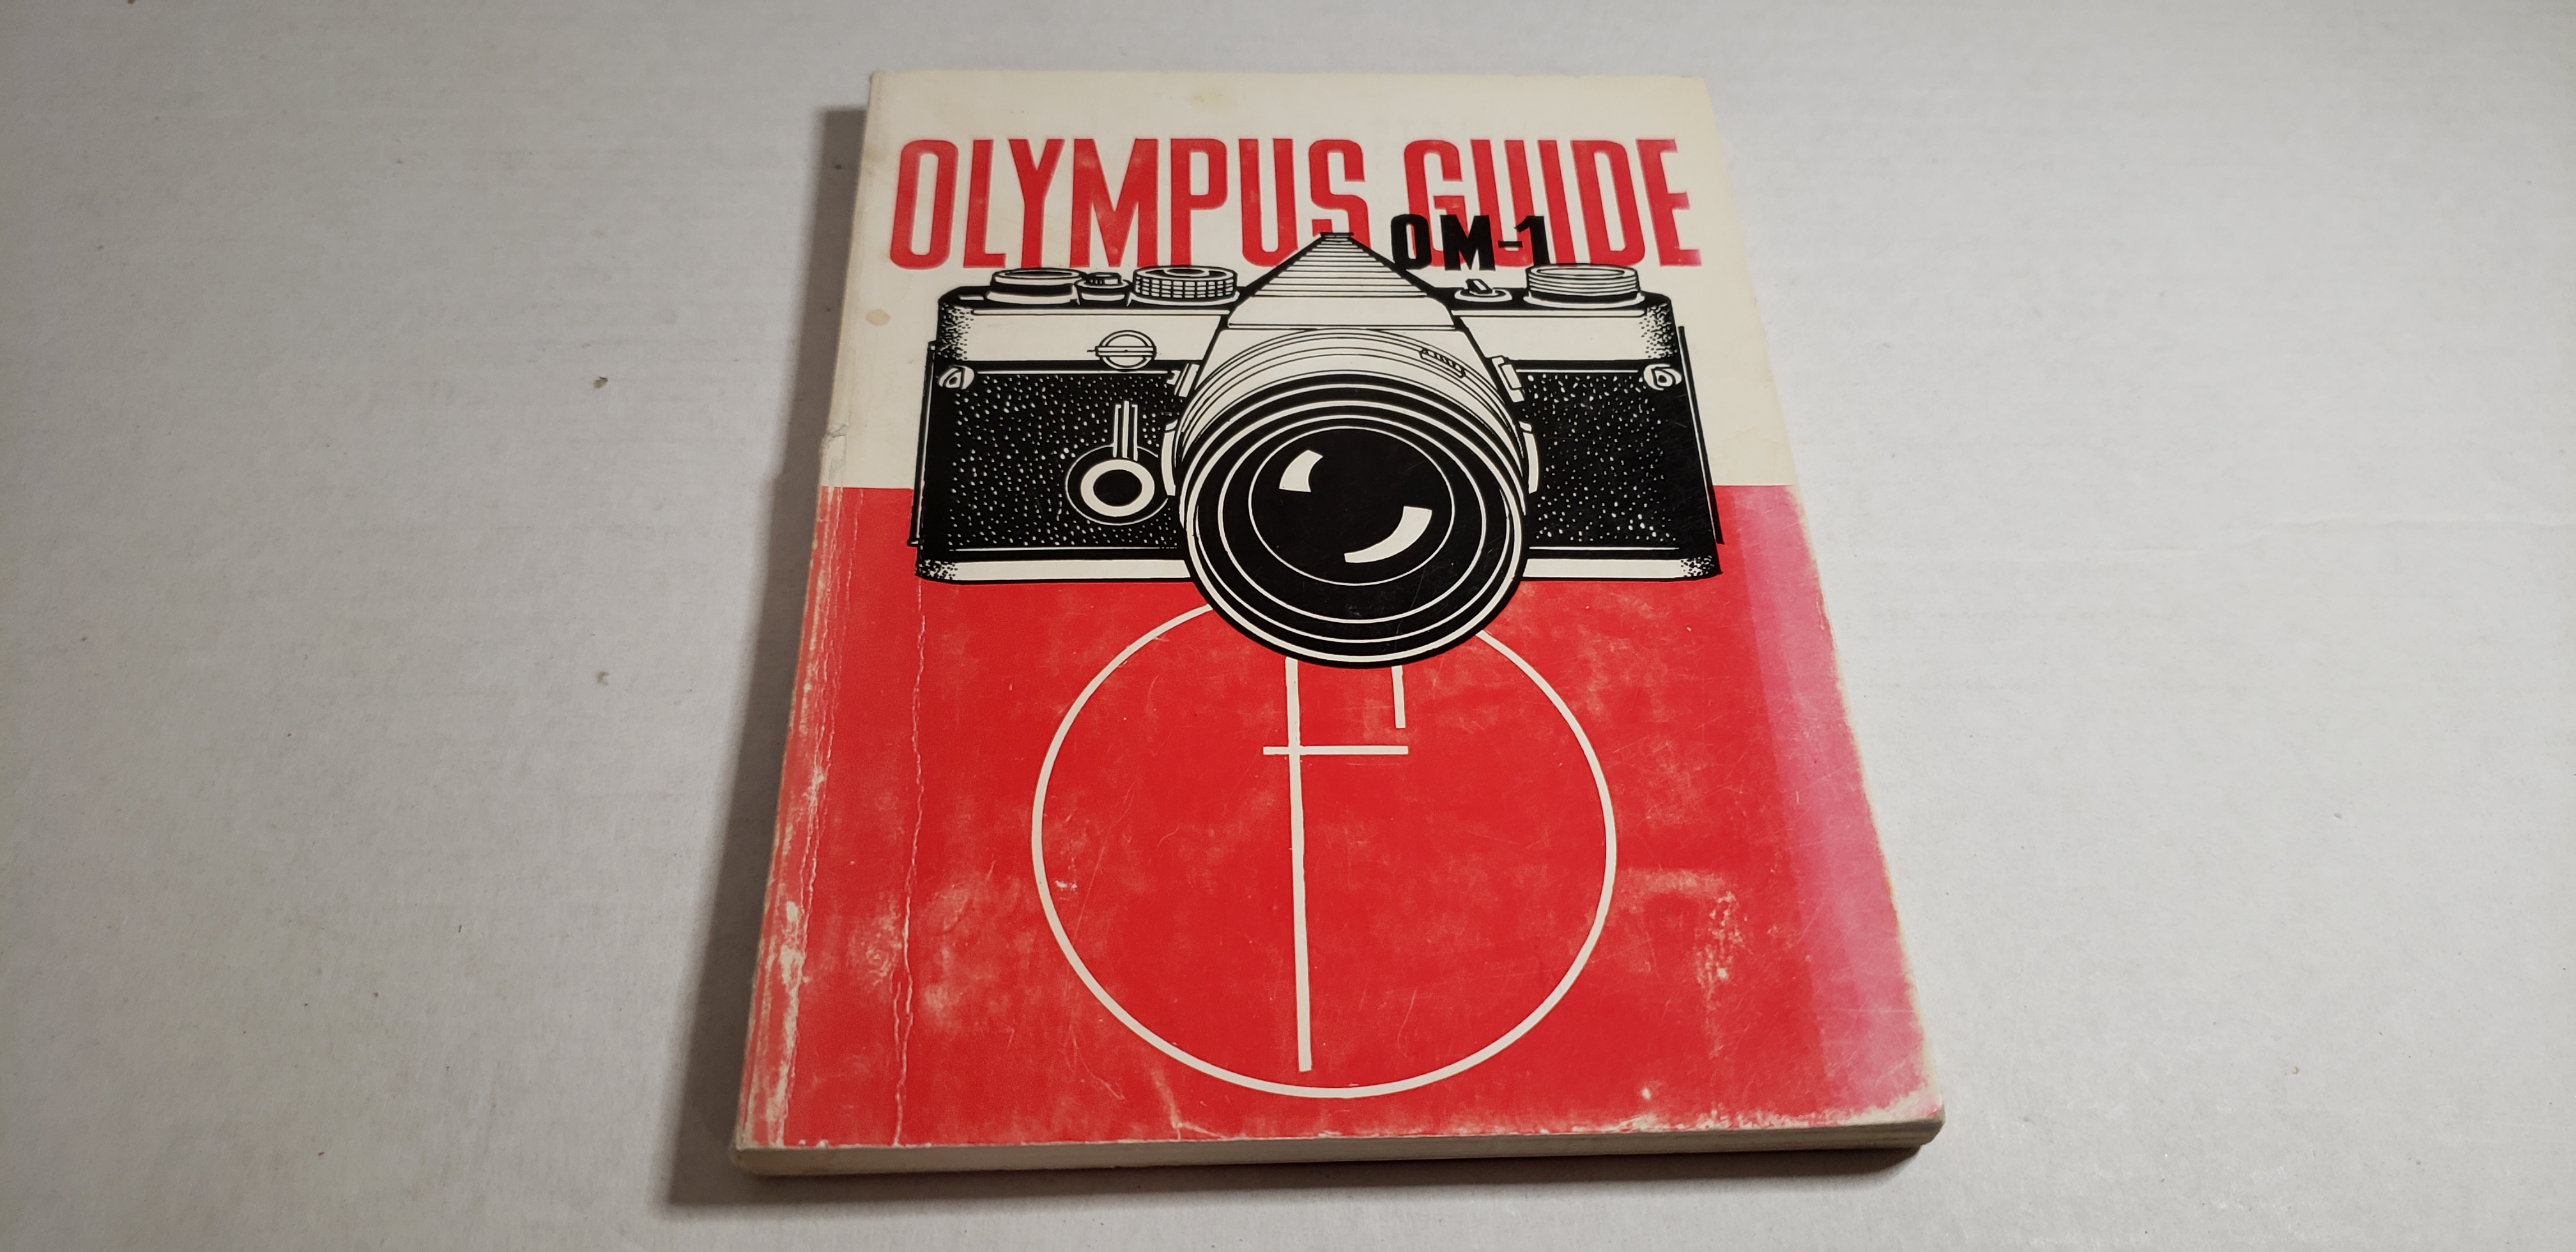 Olympus Om 1 Guide How To Use The Olympus Om 1 Camera By W D Emanuel Very Good Soft Cover 1974 First Edition Corliss Books